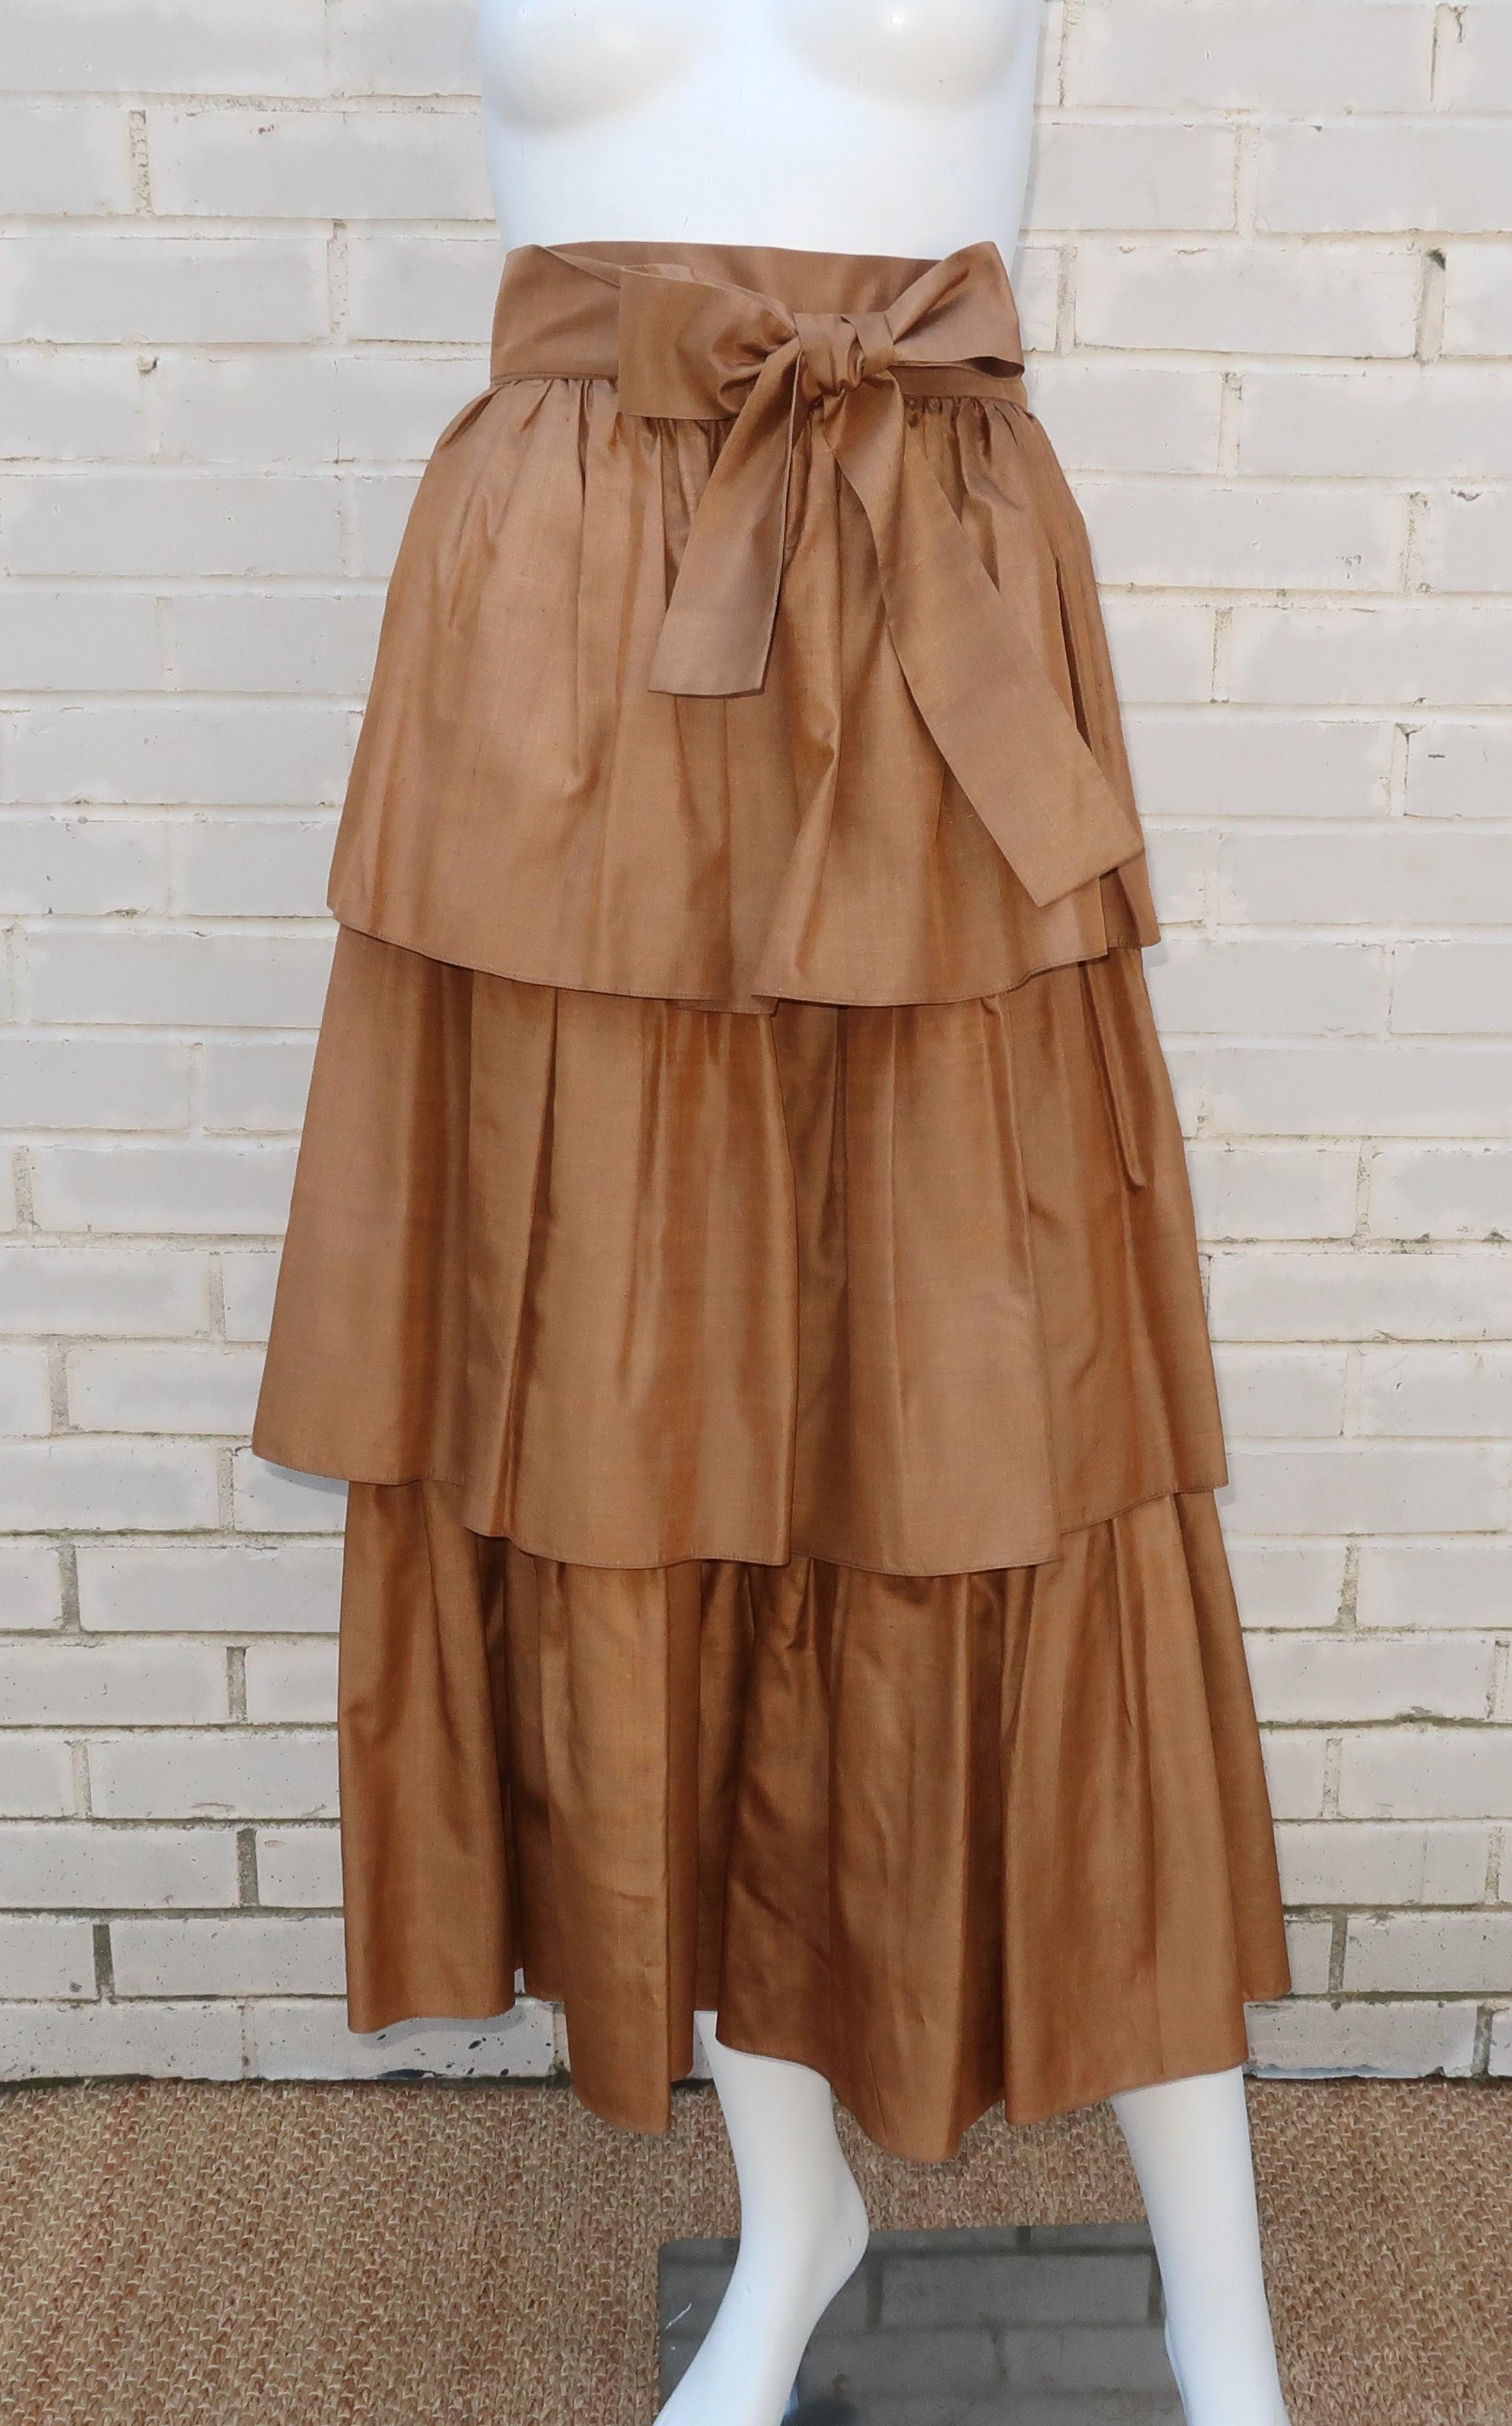 Only Yves Saint Laurent could make dressing like a 'peasant' something glamorous and absolutely desirable.  This raw silk tiered skirt is a lovely feminine design topped with a coordinating sash belt and hidden pockets in the first tier.  It zips